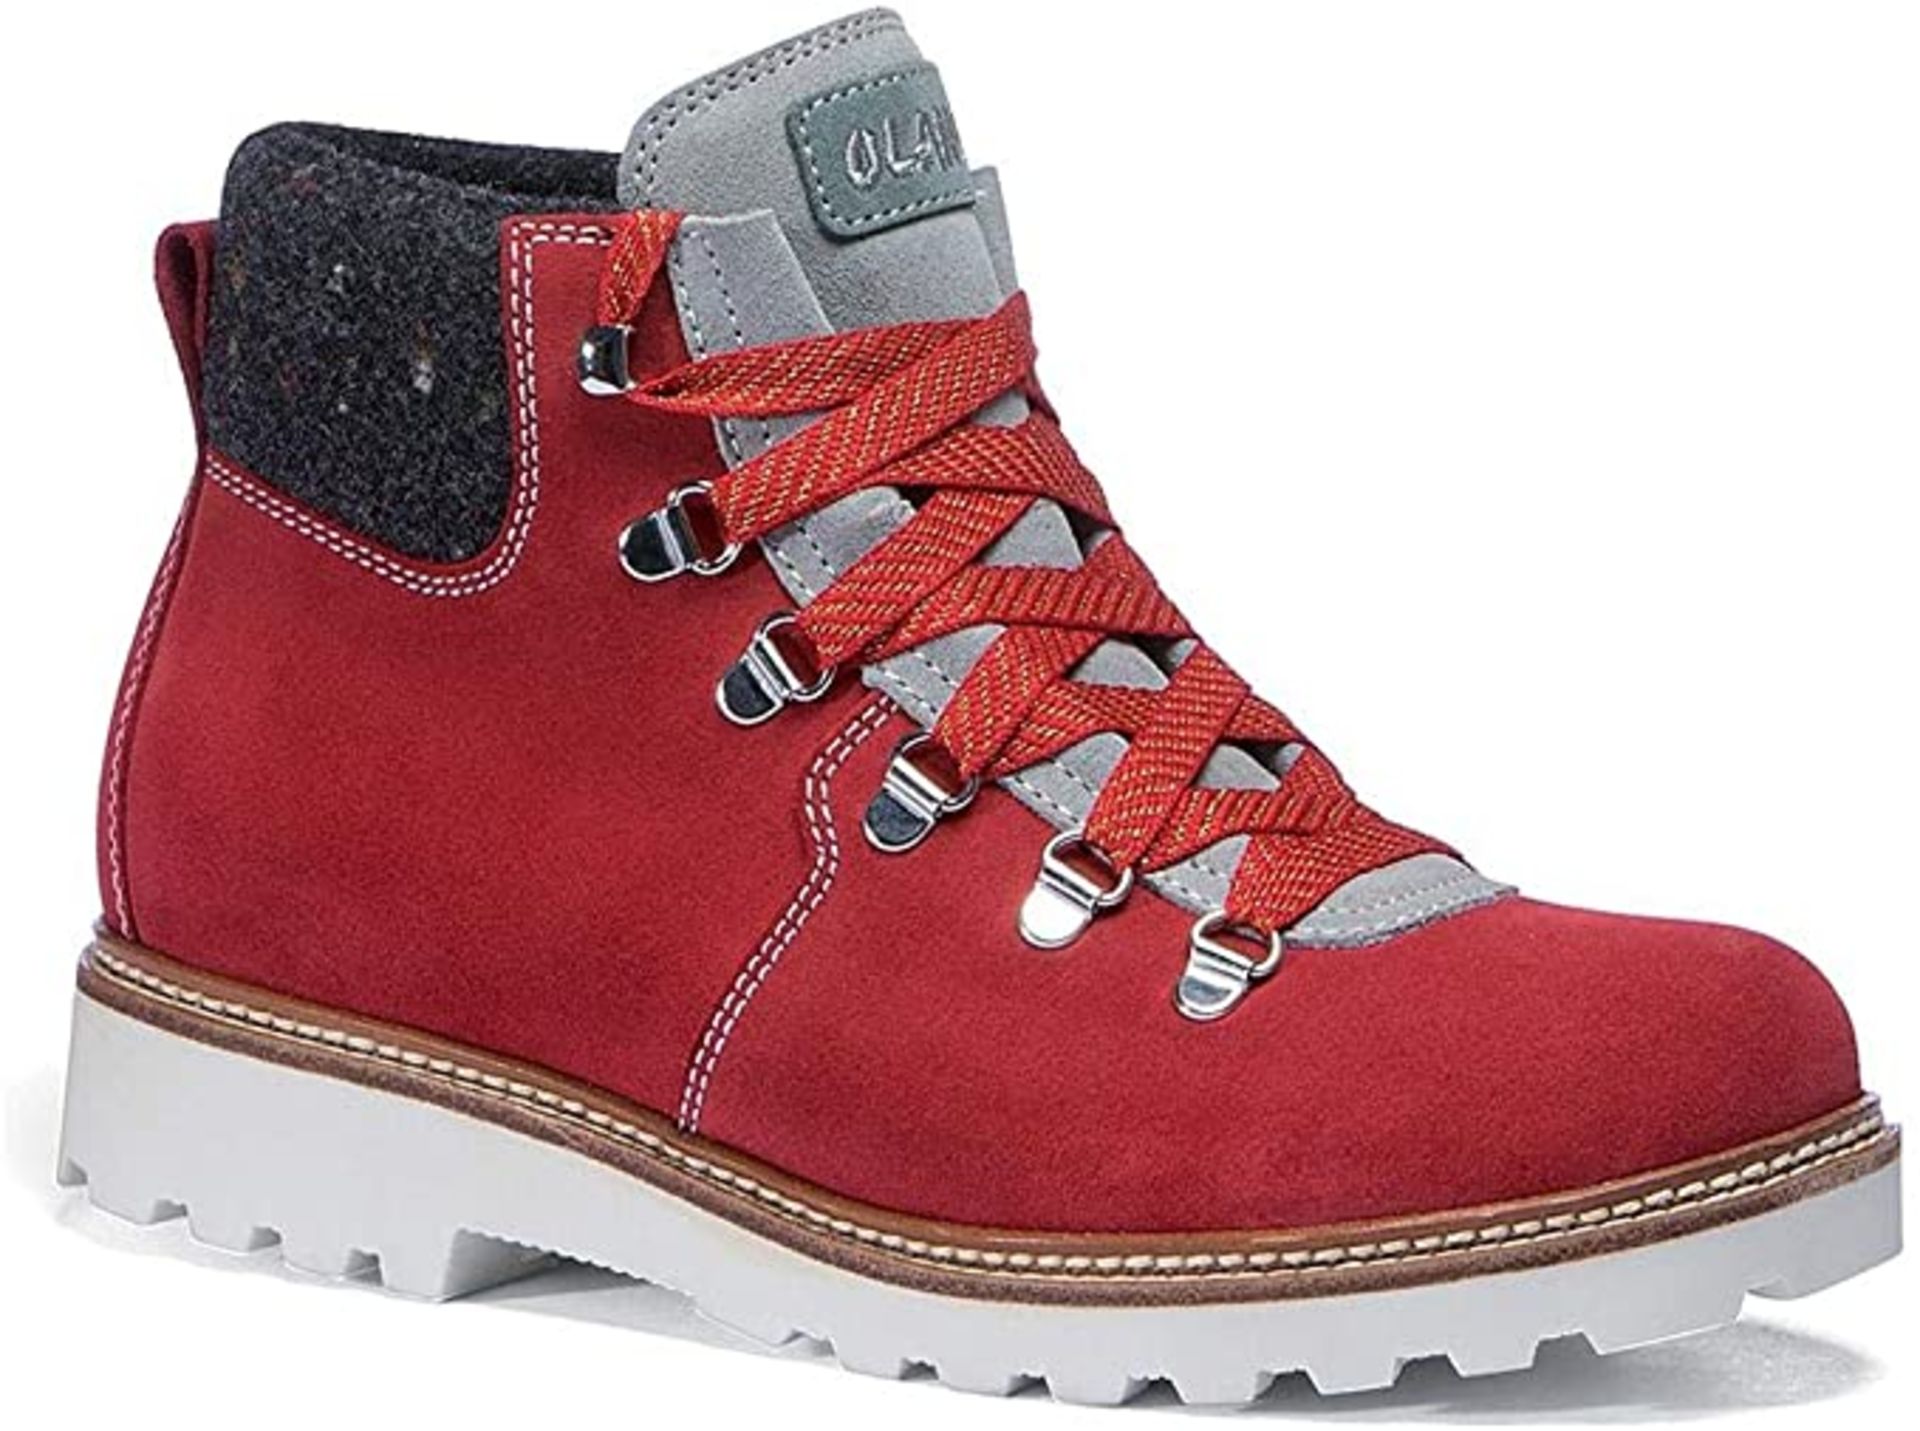 1 x Pair of Designer Olang Merano BTX 815 Rosso Women's Winter Boots - Euro Size 37 - Brand New - Image 2 of 4